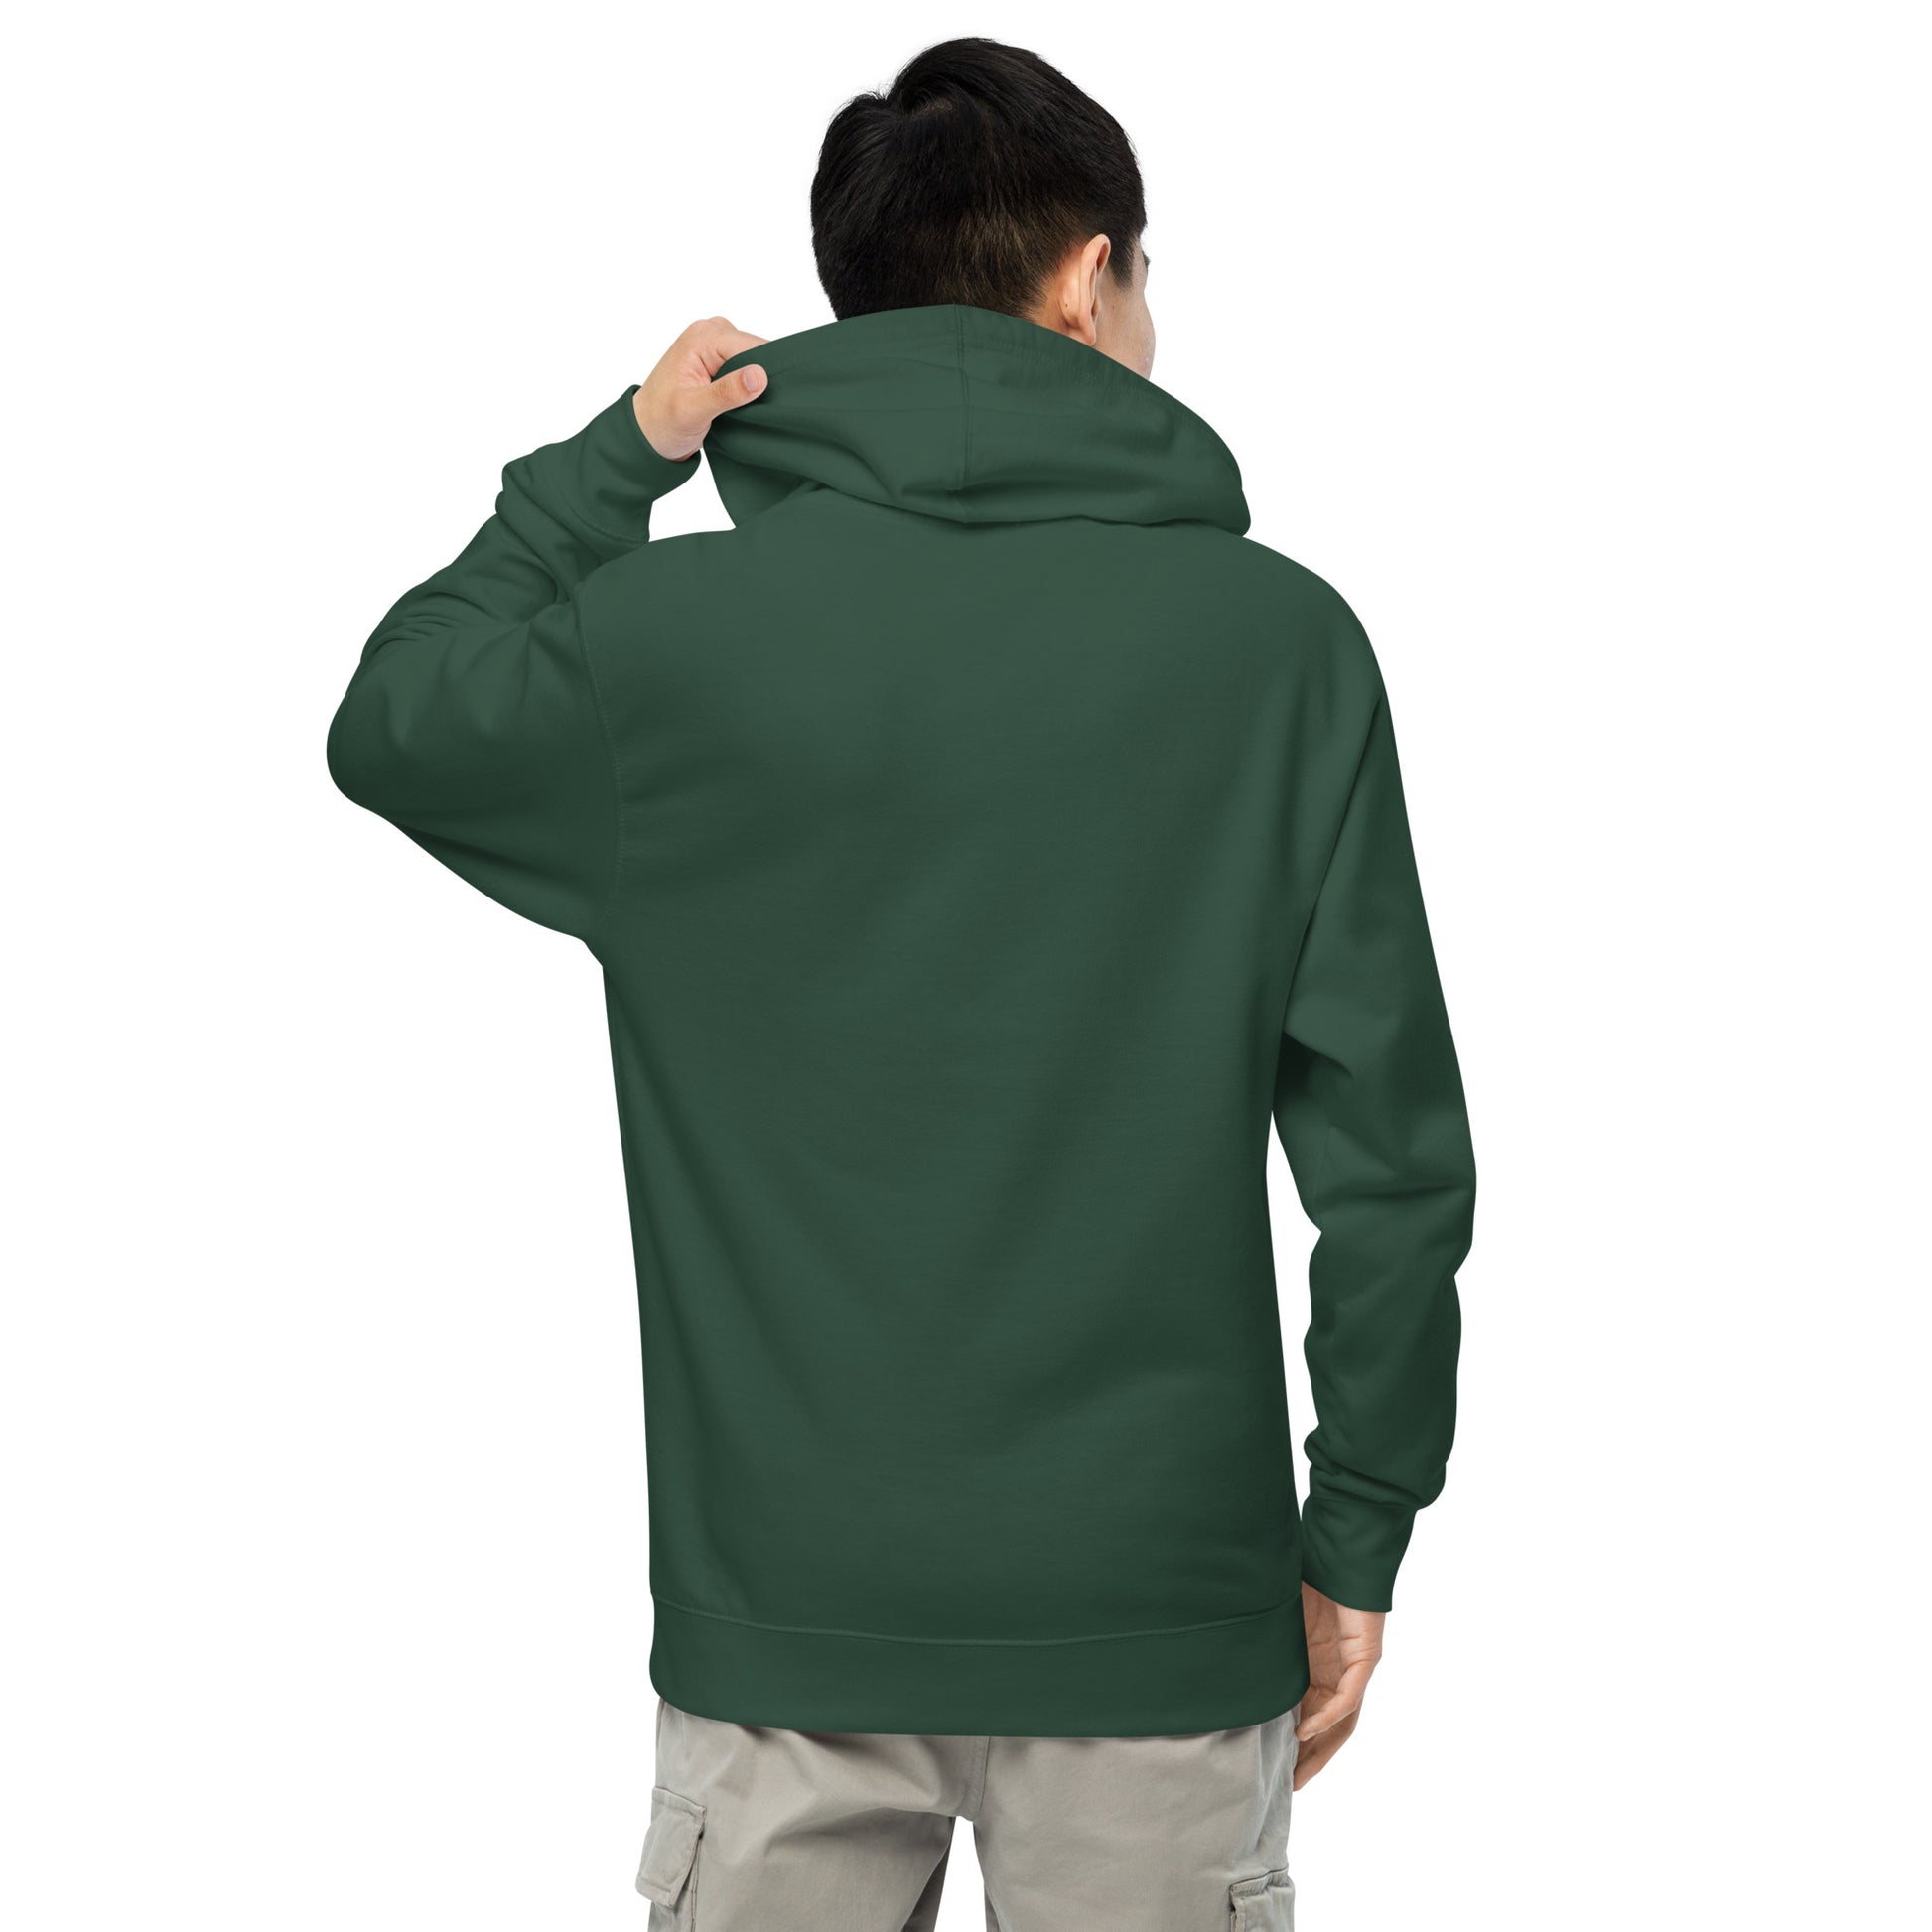 Unisex Midweight Hoodie - Independent Trading Co. SS4500